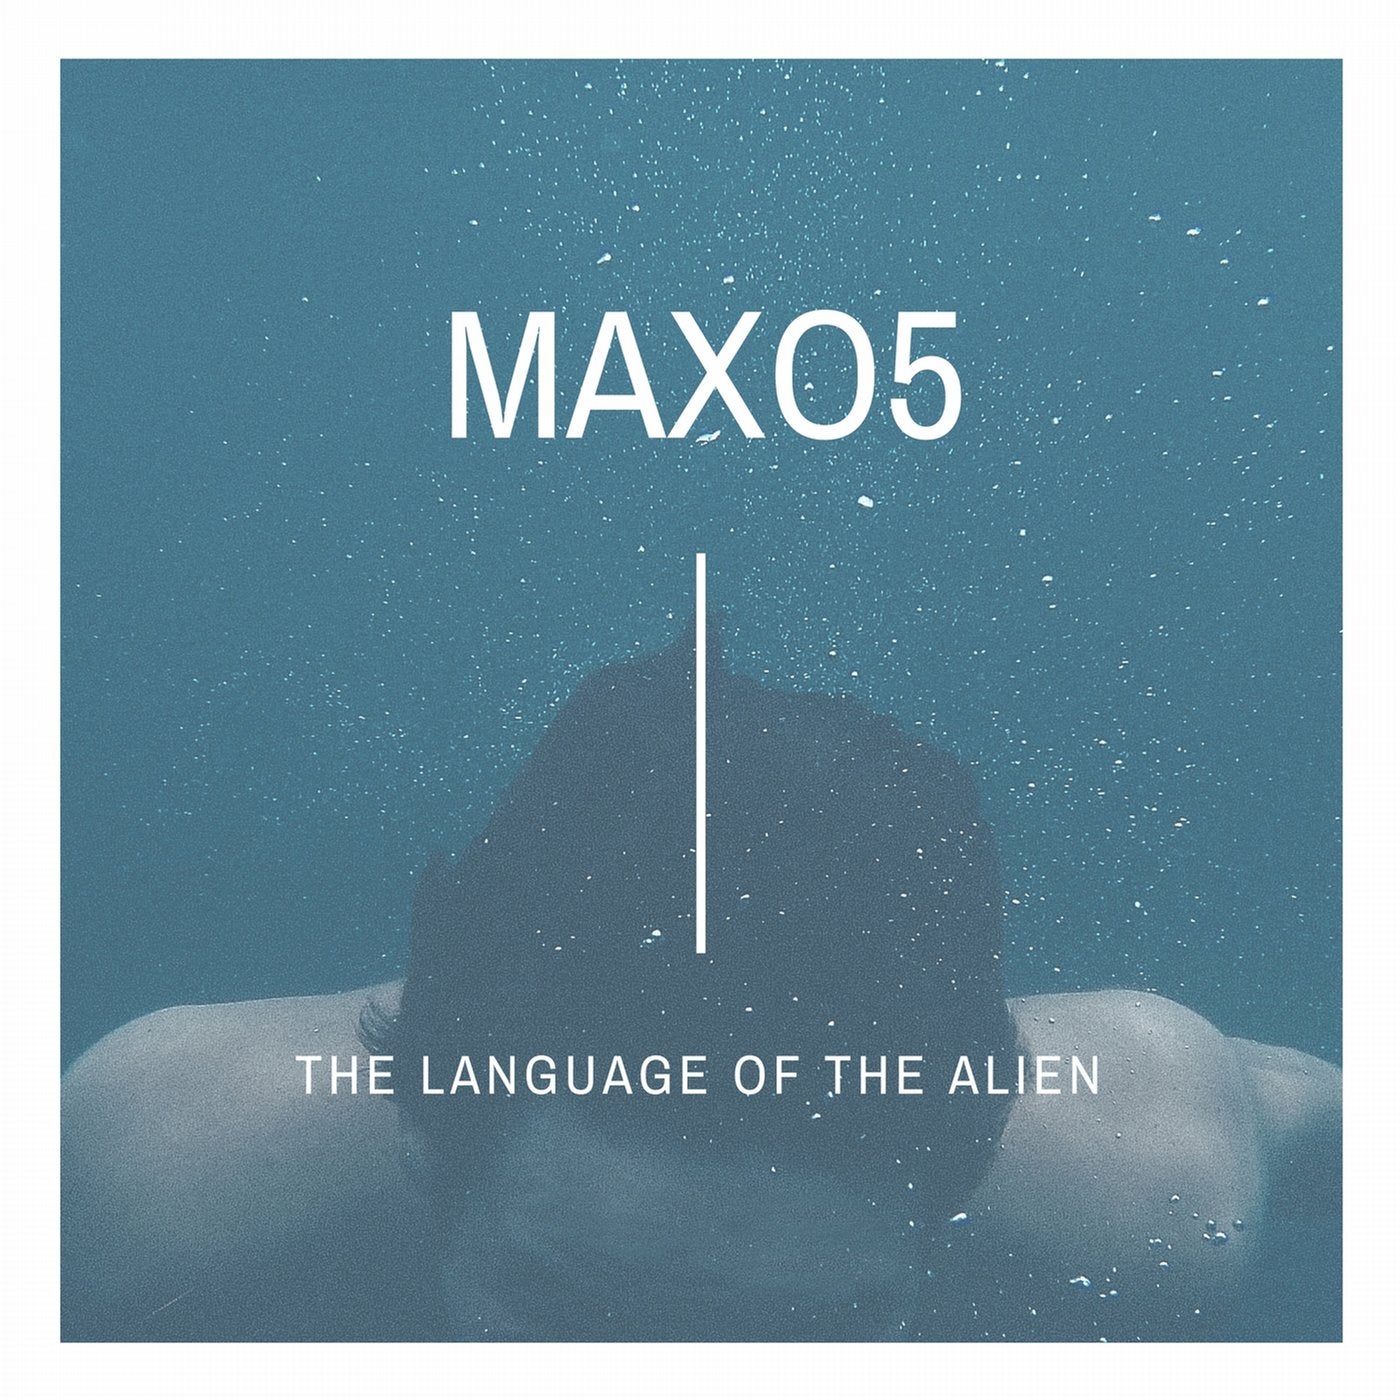 The Language of the Alien